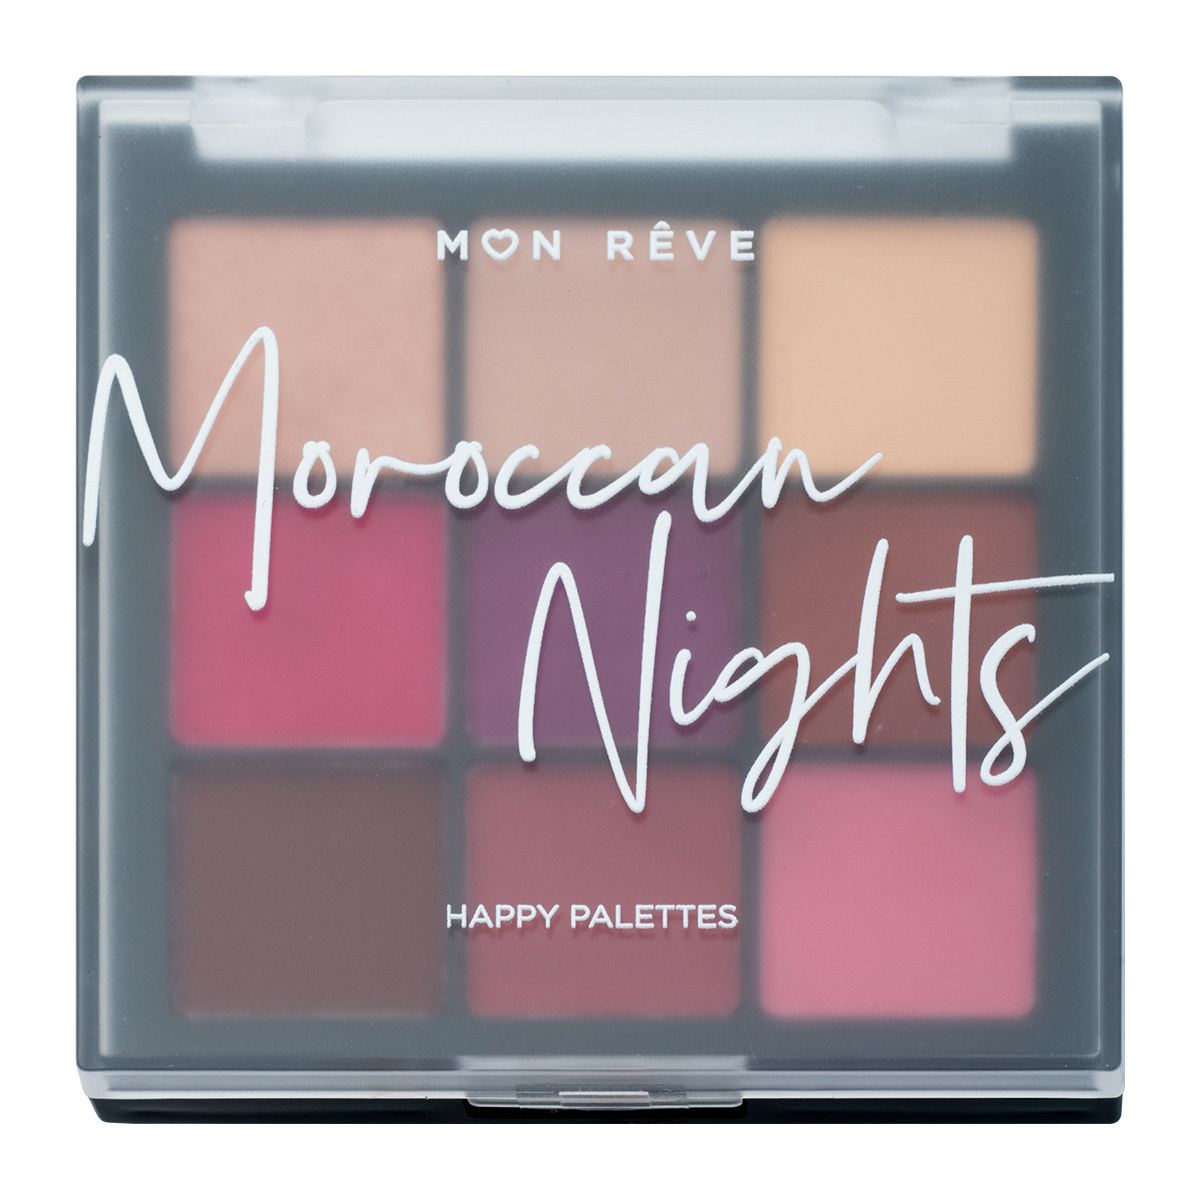 01 Moroccan Nights  Happy Palettes